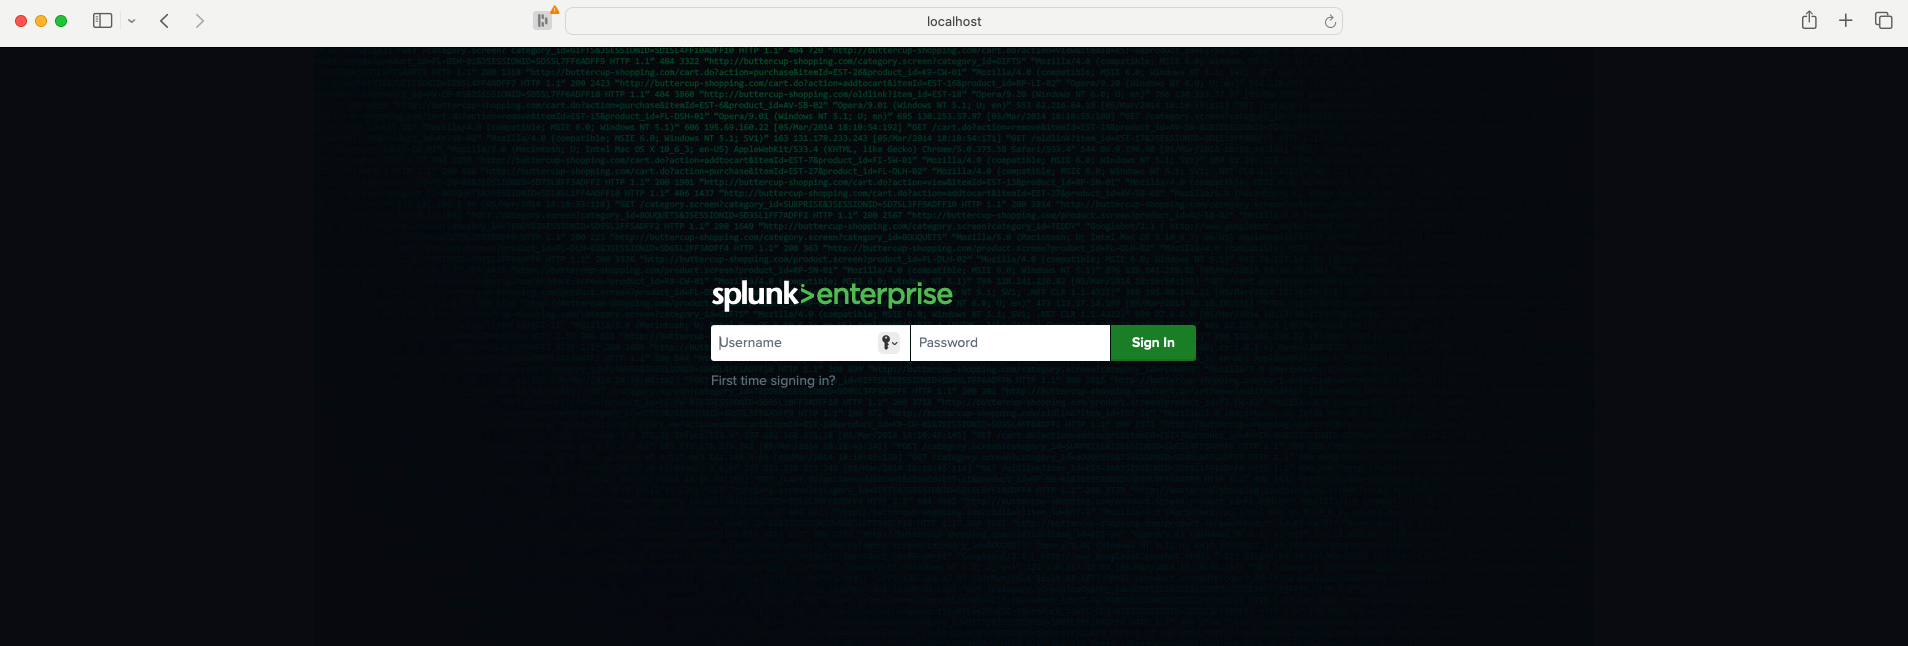 Web browser displaying the Splunk Enterprise login page with username and password fields on a dark background with computer code.